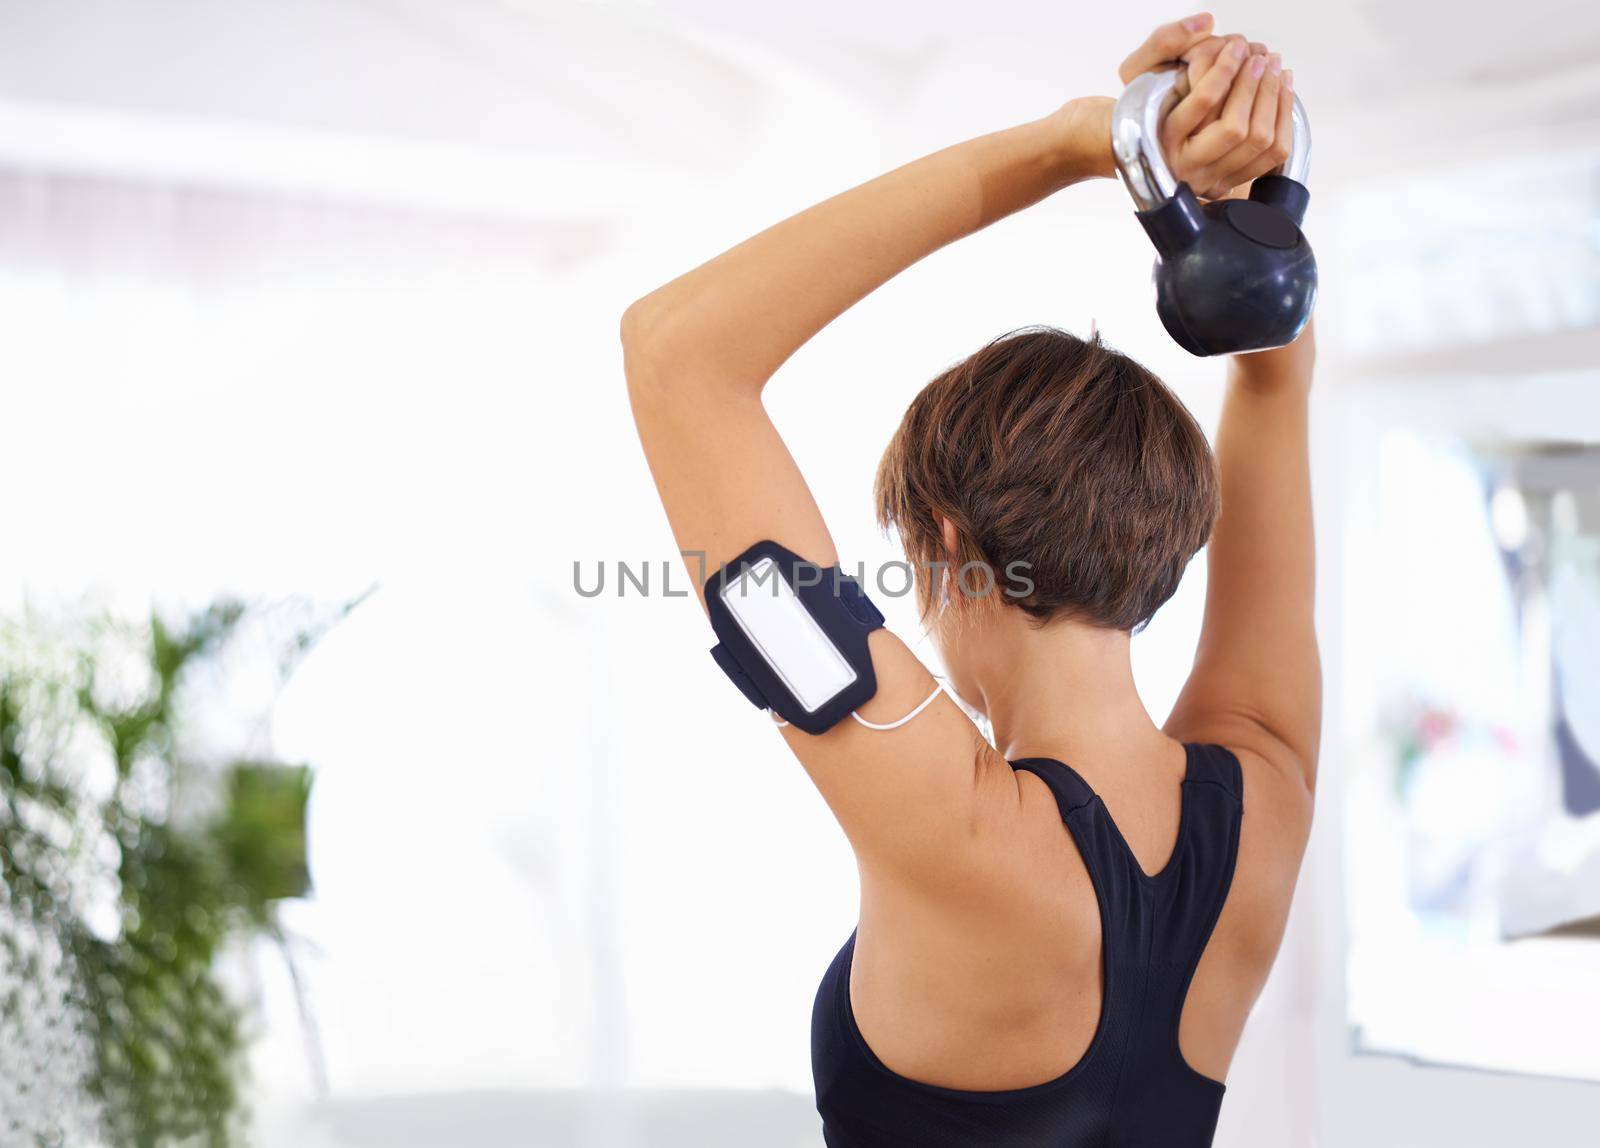 Shot of a woman working out with a dumbbells.